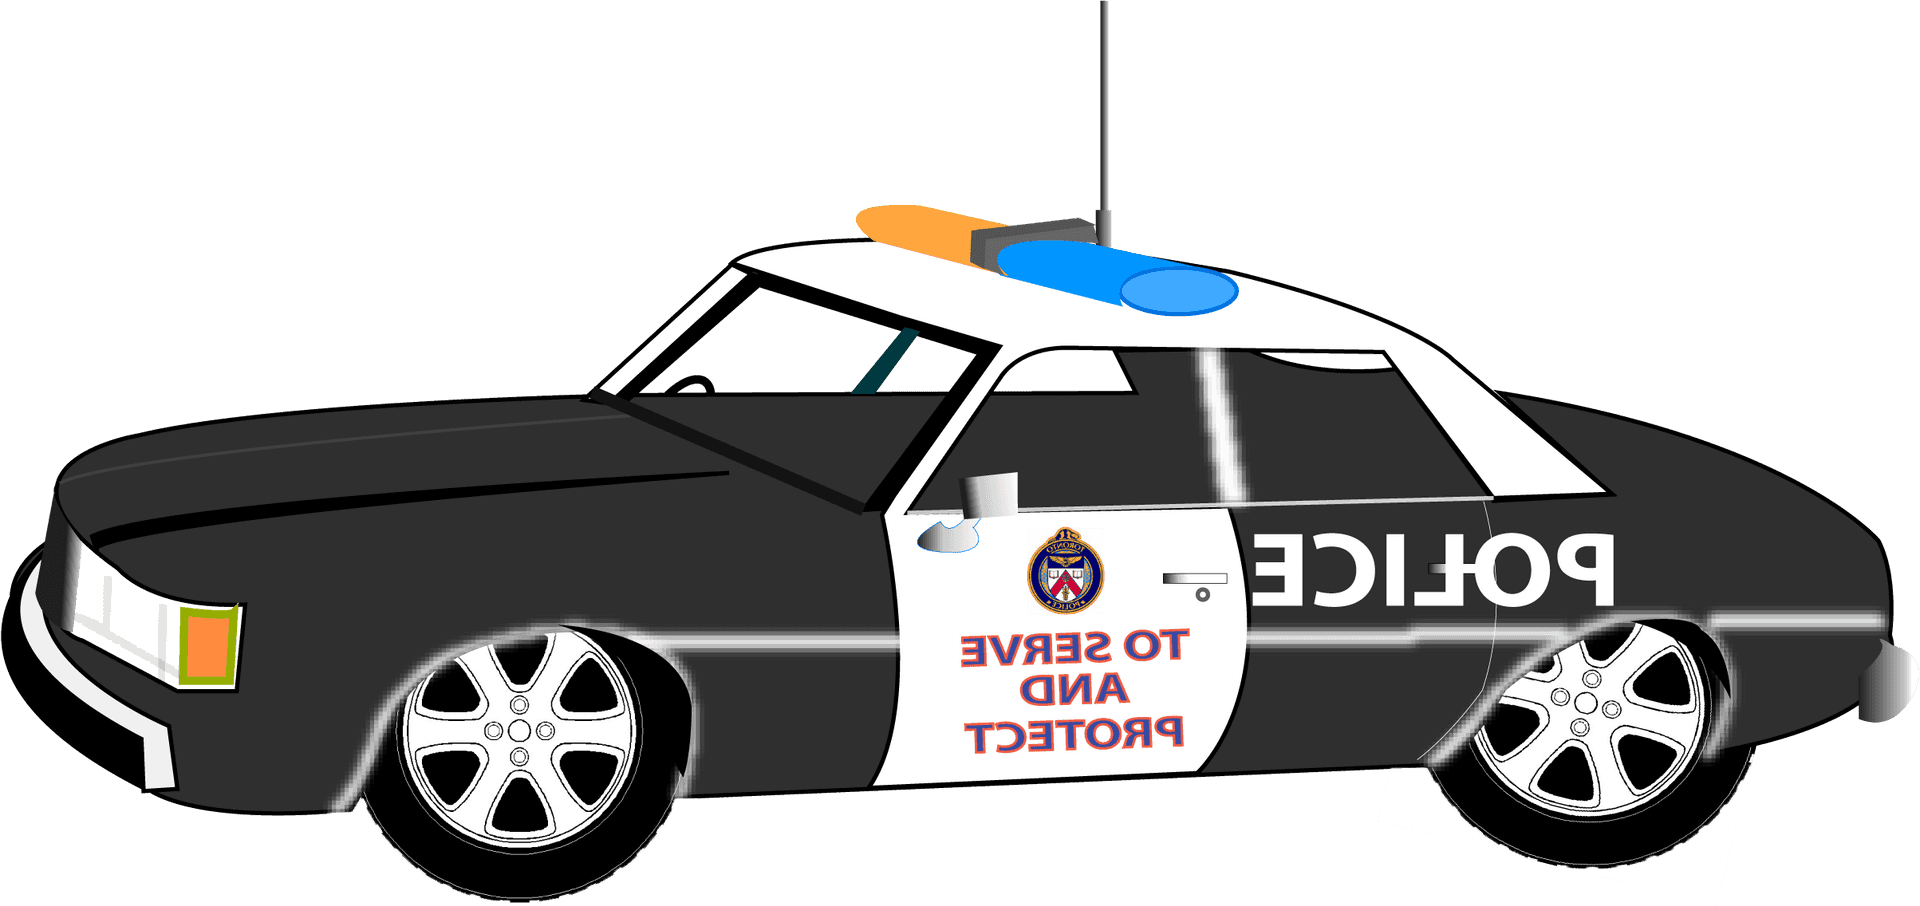 Blackand White Police Car Illustration.png PNG